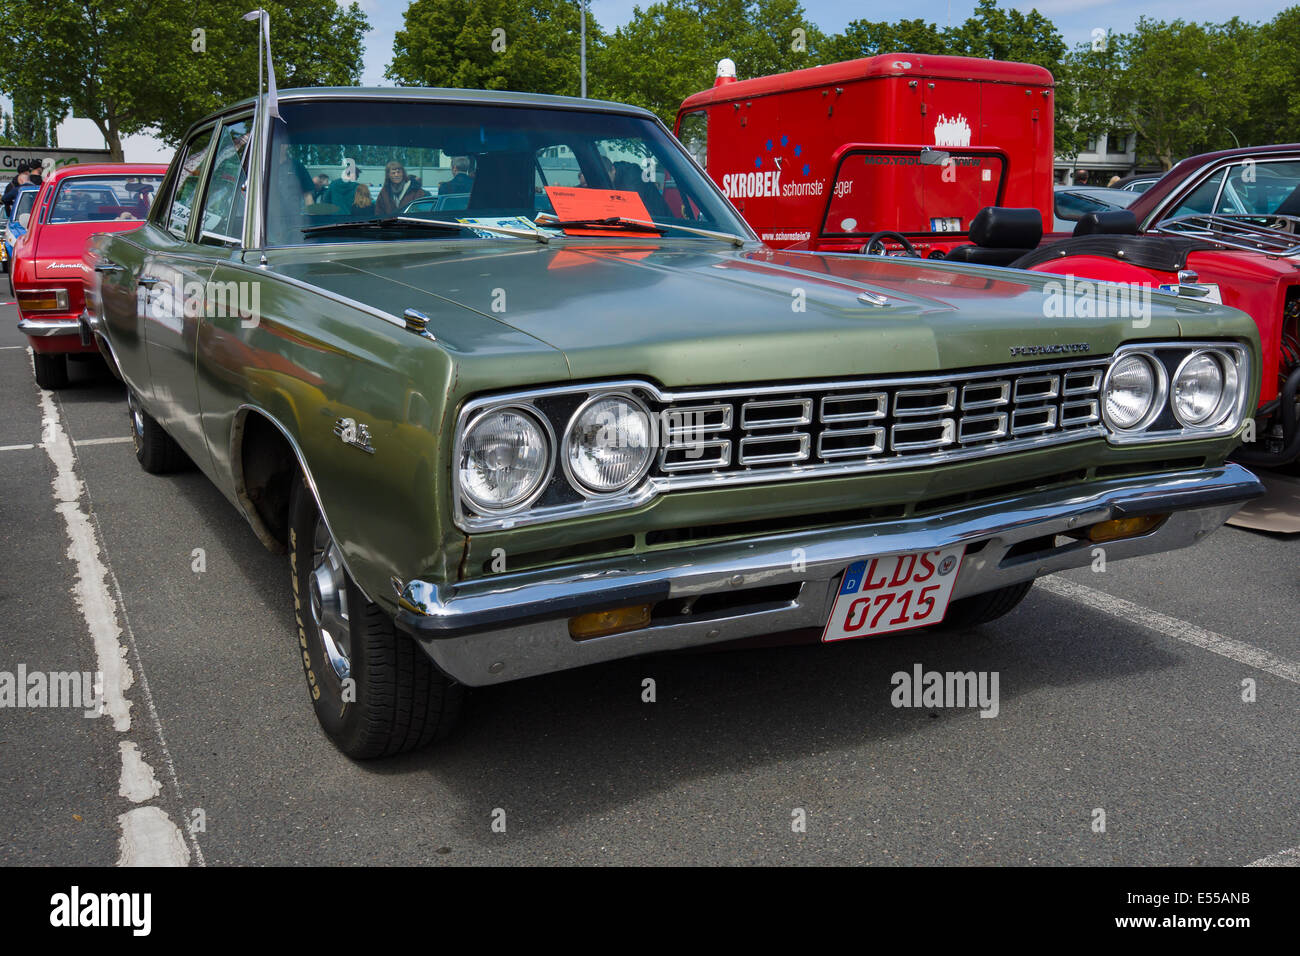 1970 Plymouth Belvedere Is a Limelight Green Sleeper With a Nasty Surprise  Under the Hood - autoevolution